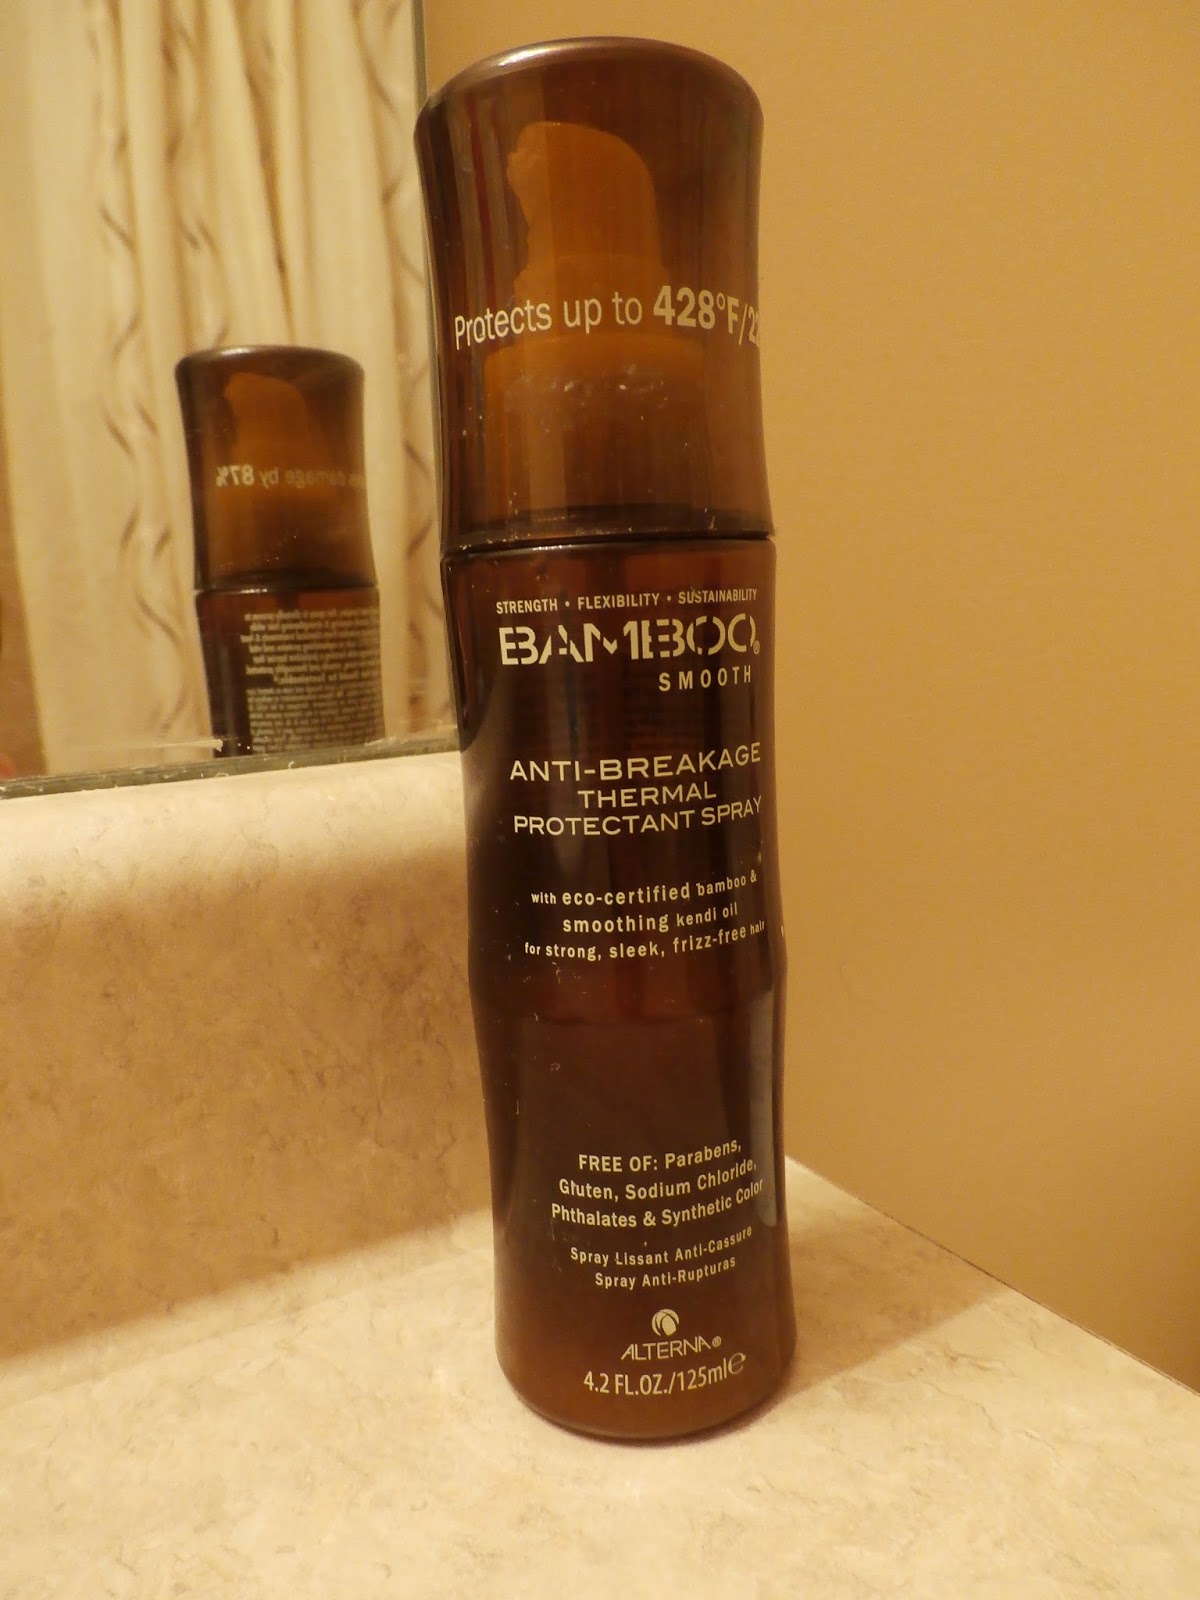 My Makeup Issues Alterna Bamboo Smooth Anti Breakage Thermal Protectant Spray Review